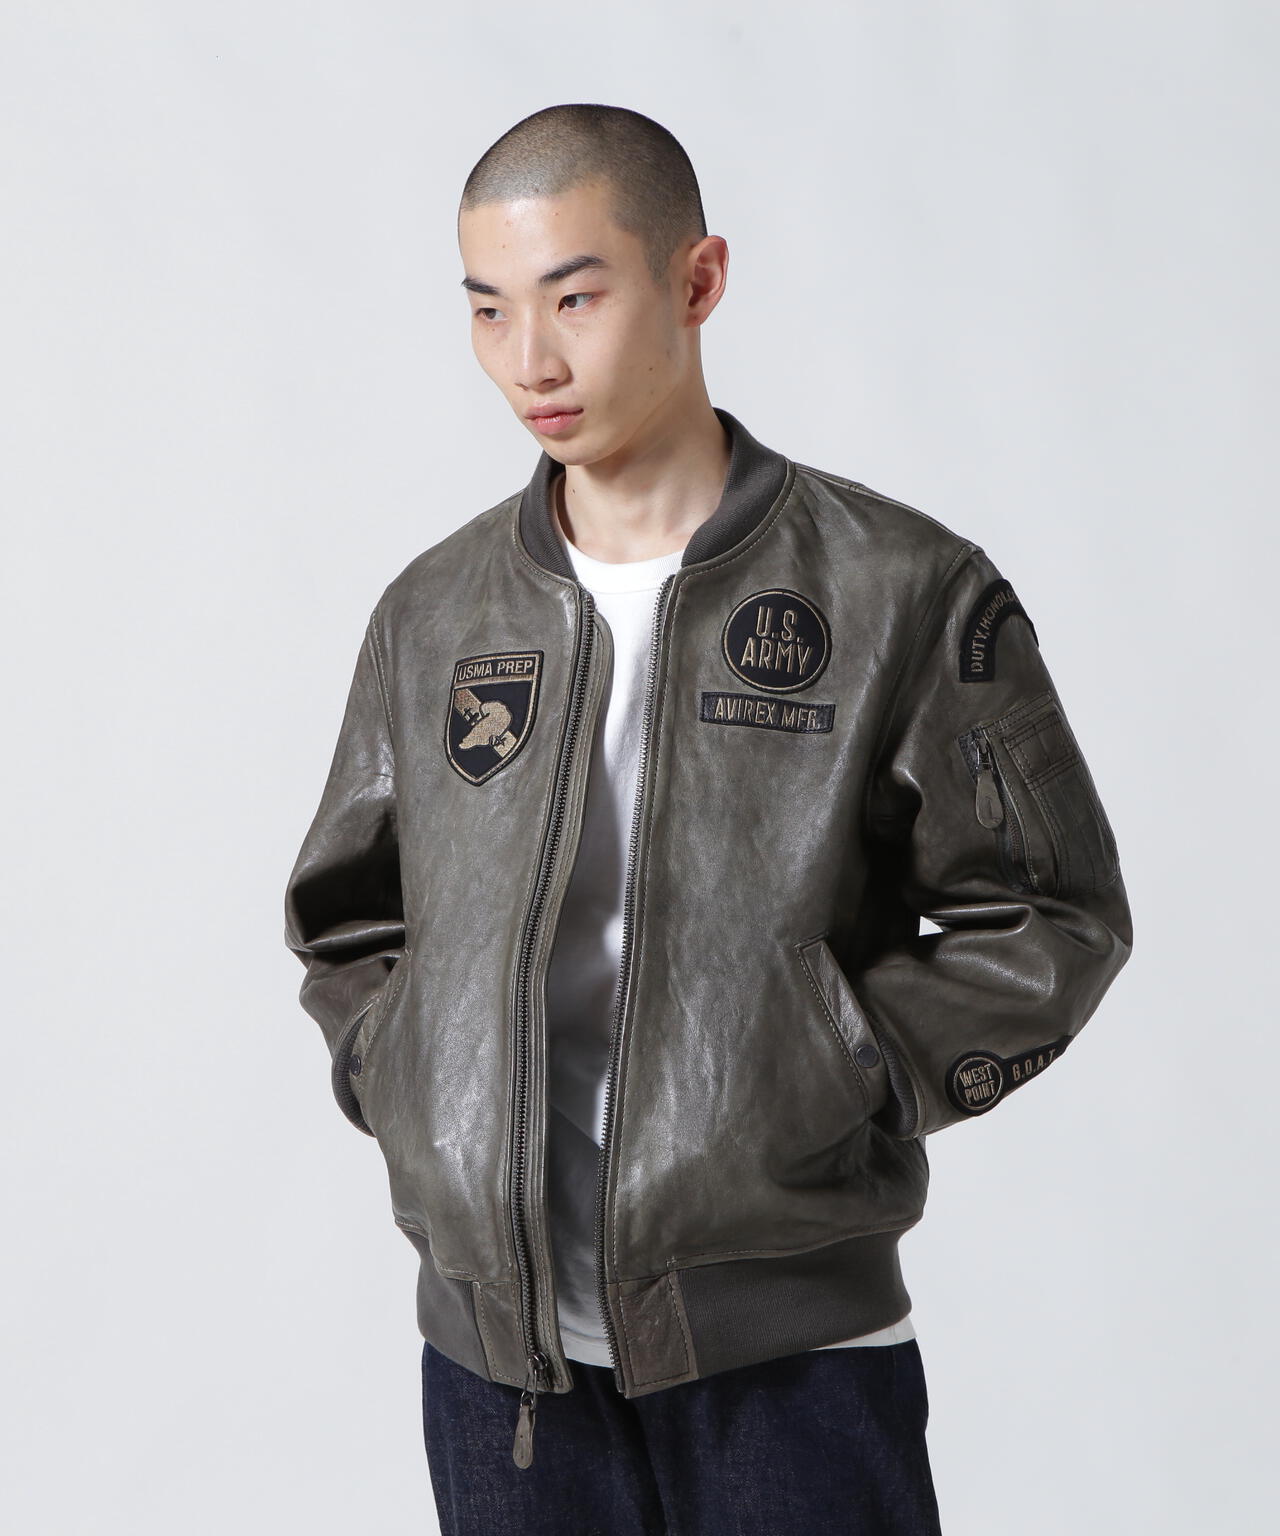 COLLECTION》AGED LEATHER TYPE MA-1 JACKET WEST POI | AVIREX 